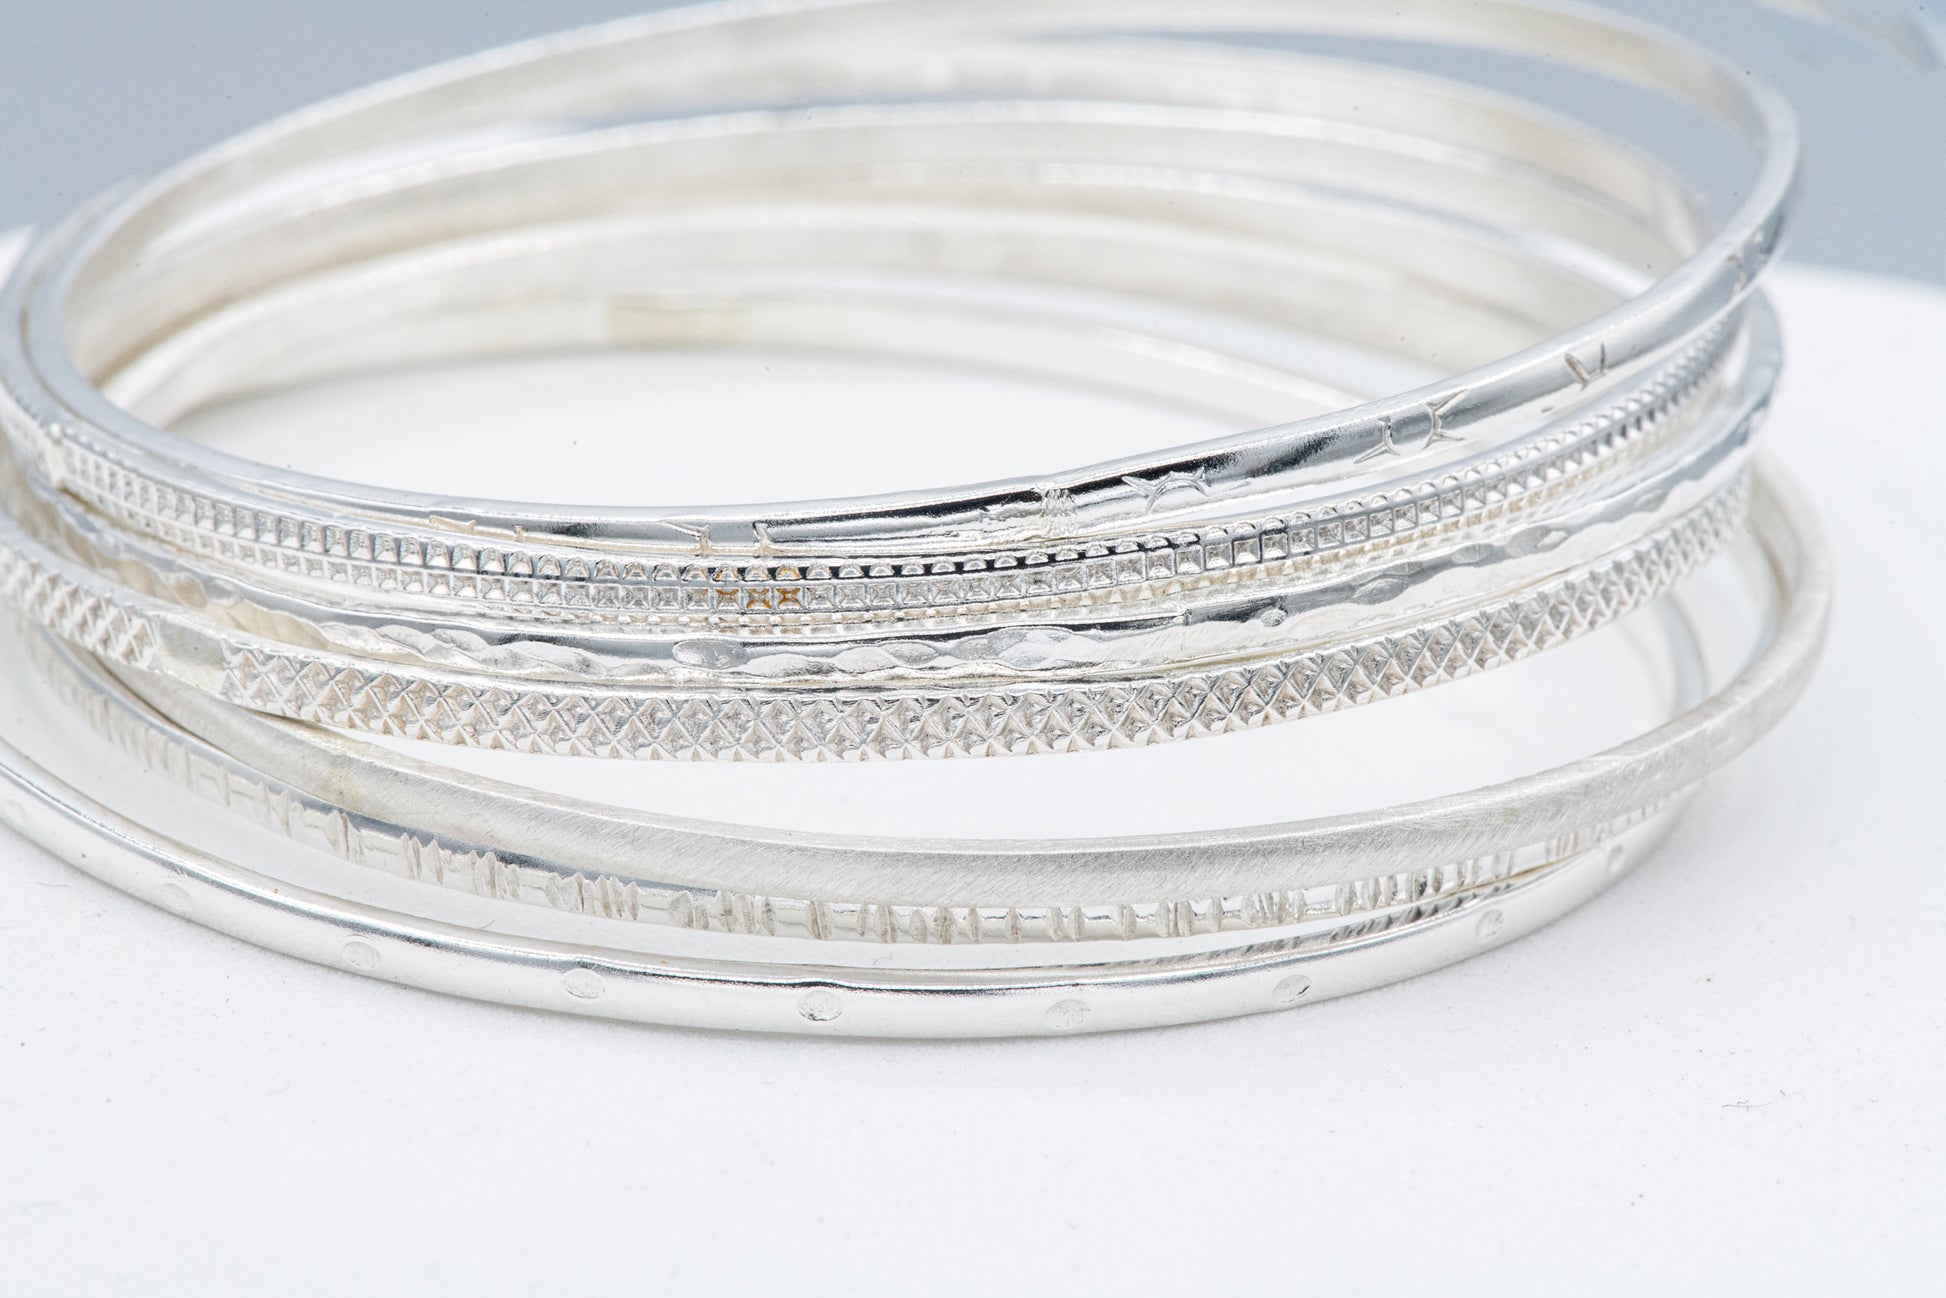 A set of seven handmade sterling silver bangles on a white surface.